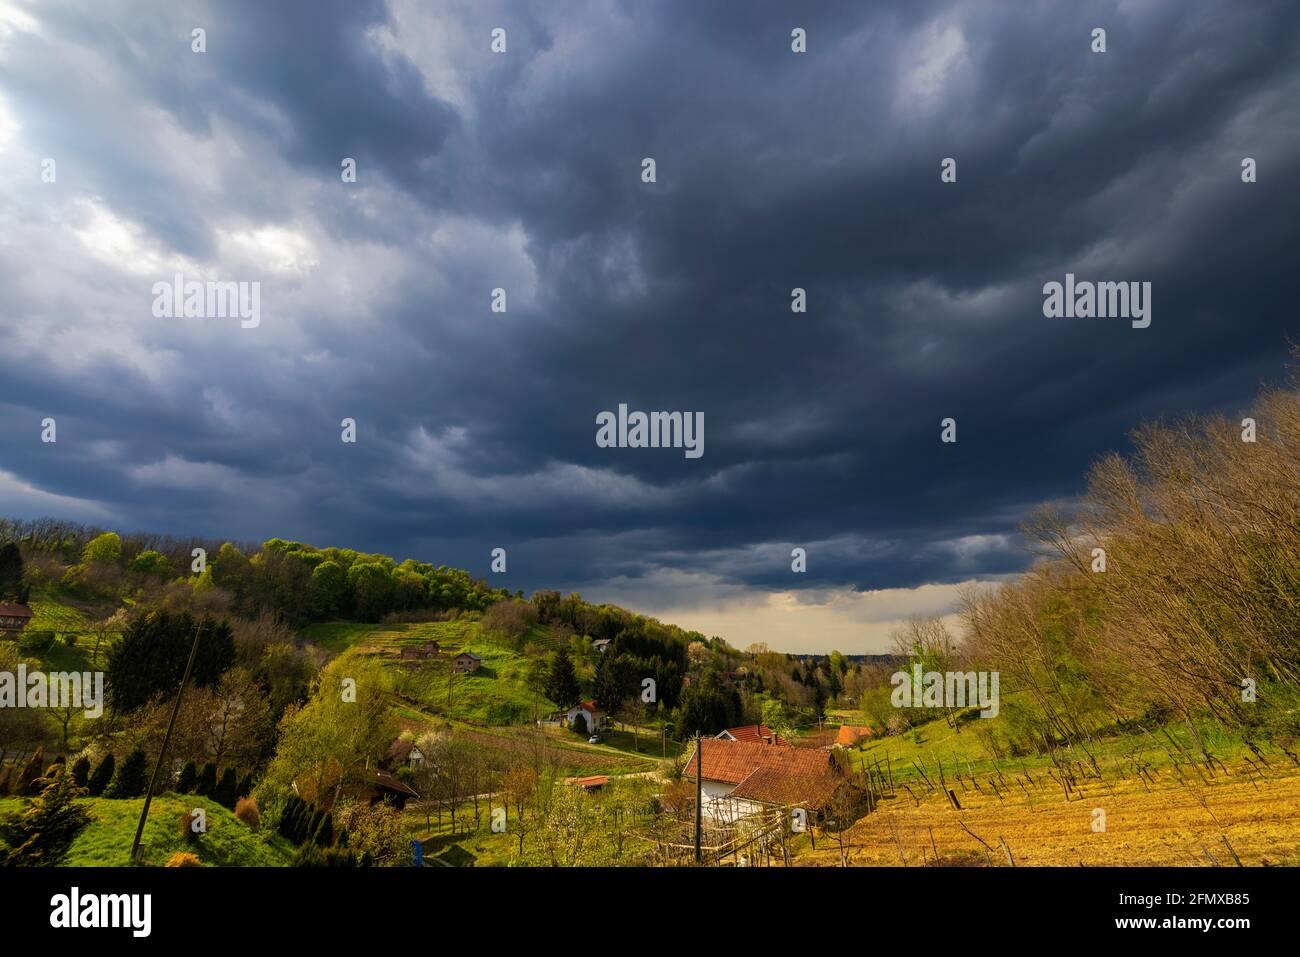 Stormy clouds over the hills in the countryside, Croatia Stock Photo